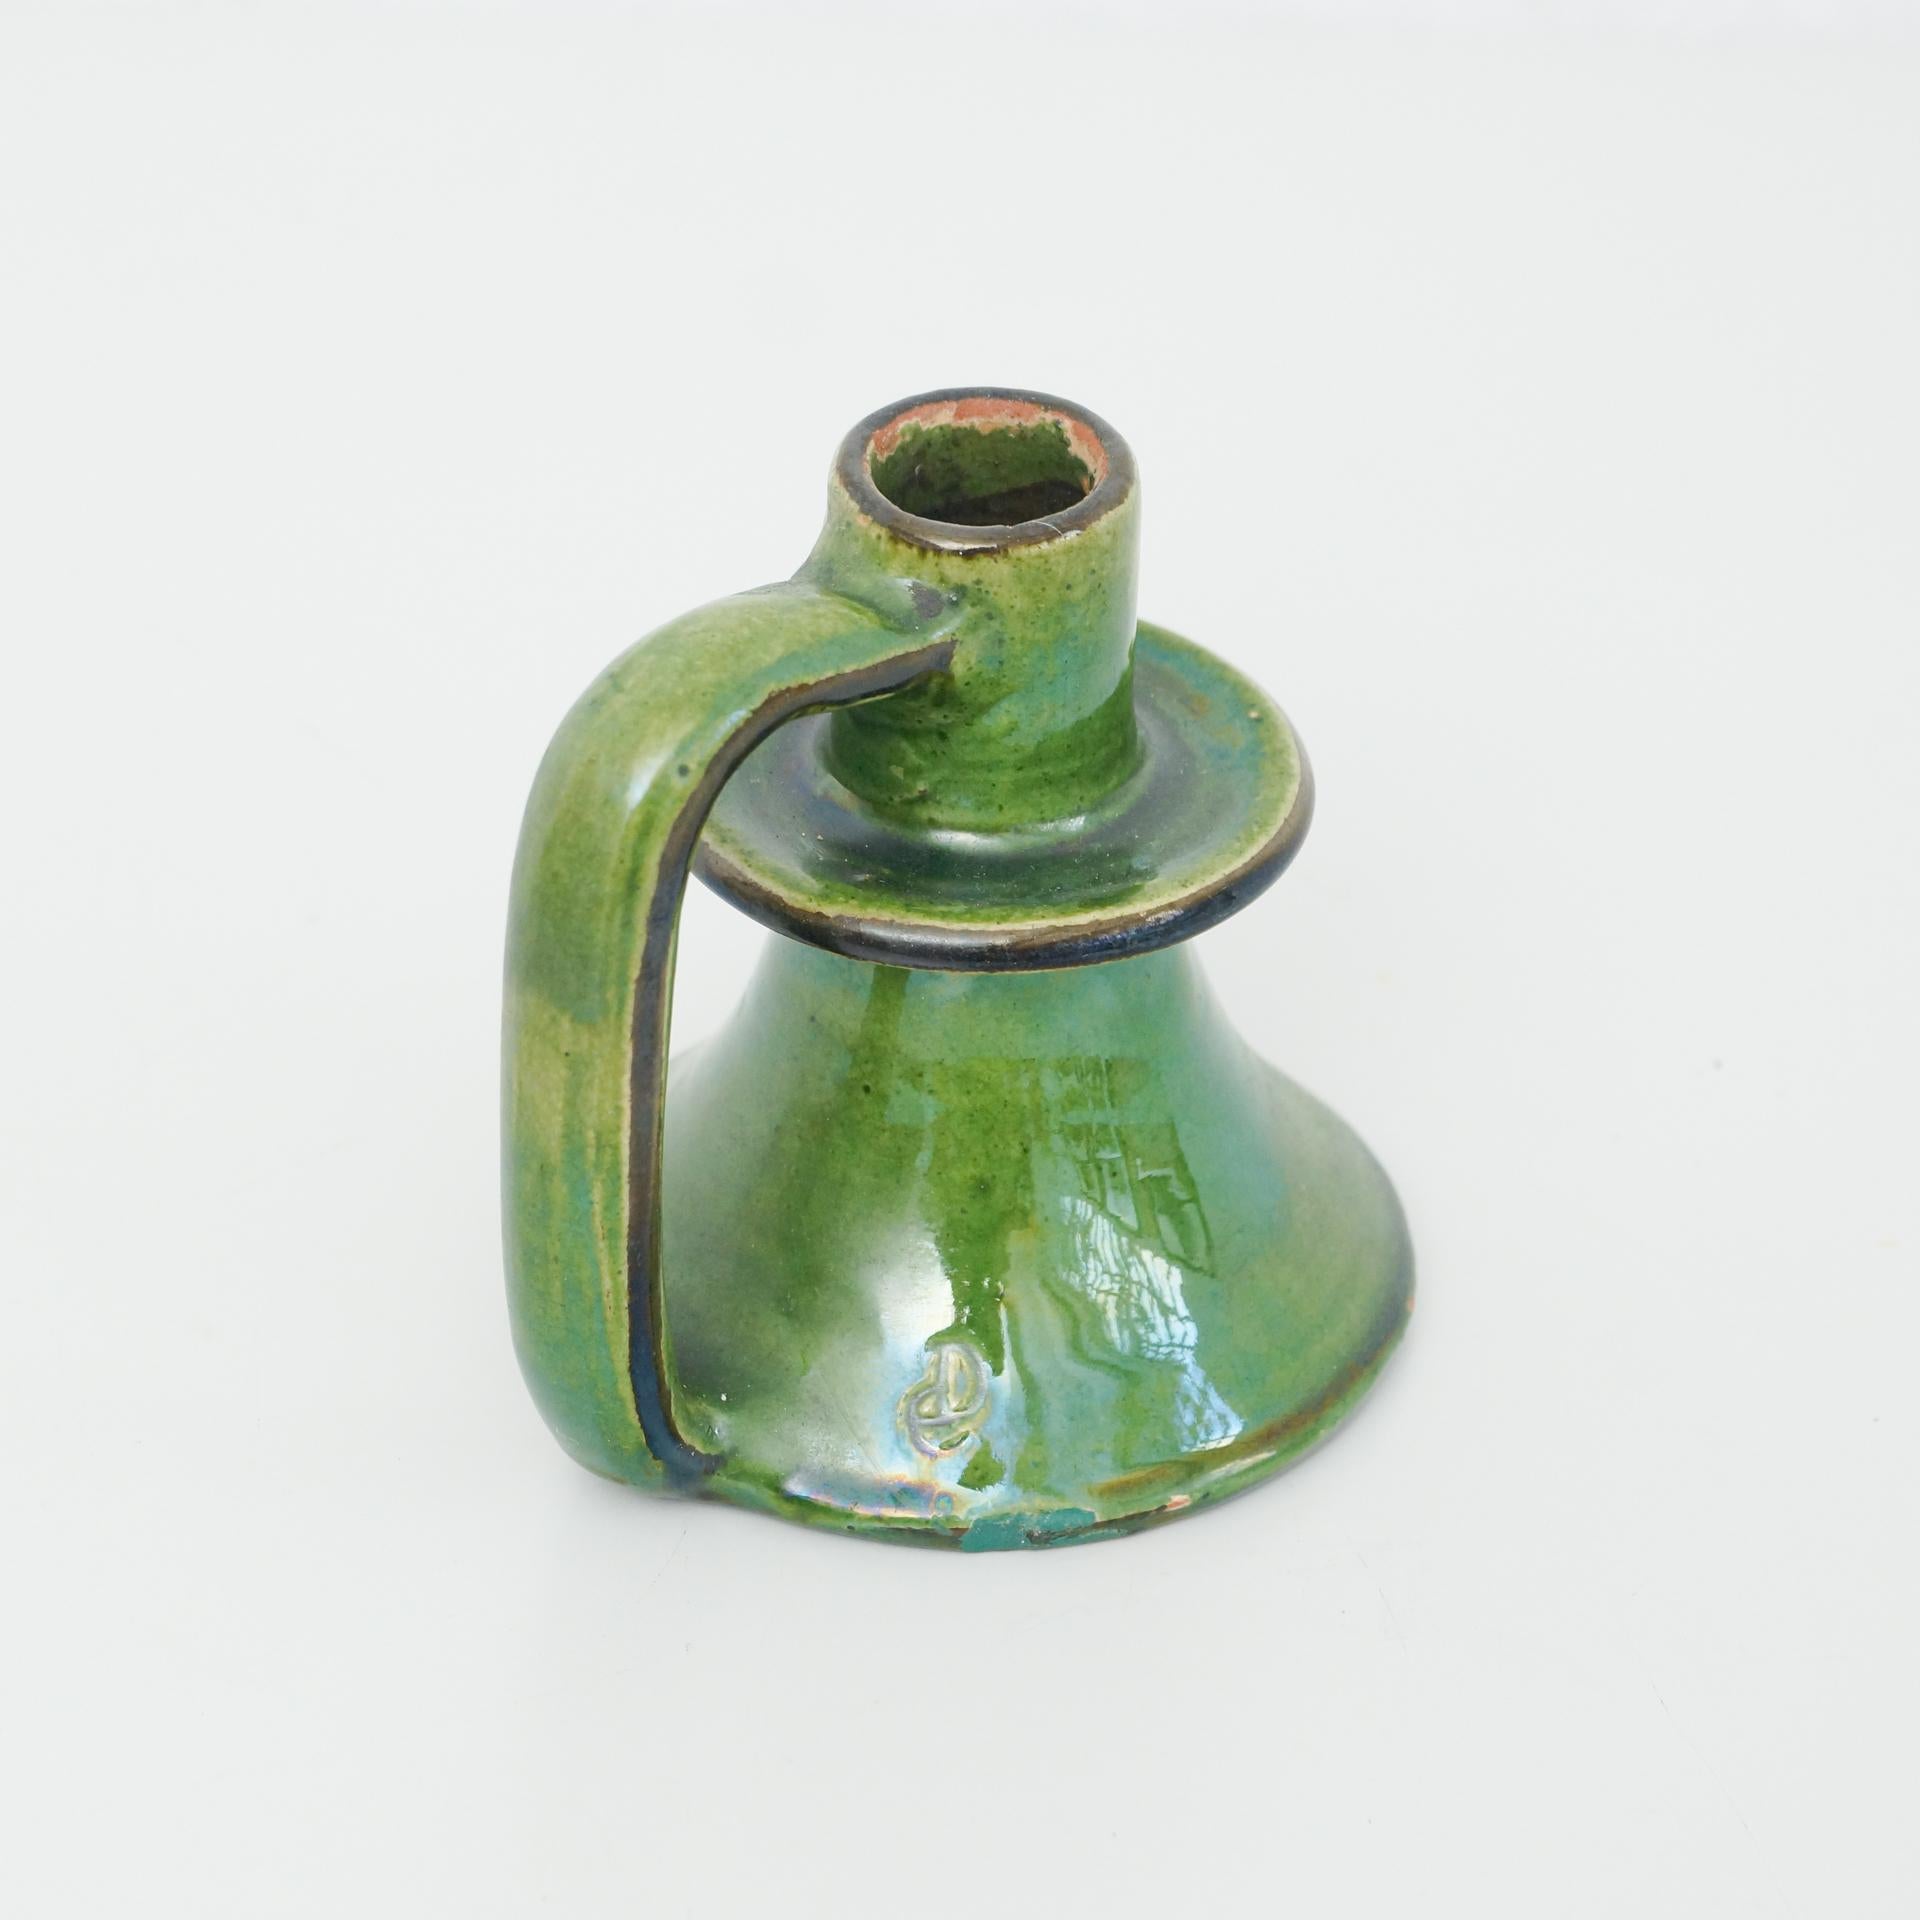 Ceramic candle holder by Catalan artist Diaz Costa, circa 1960.


In original condition, with minor wear consistent of age and use, preserving a beautiul patina.